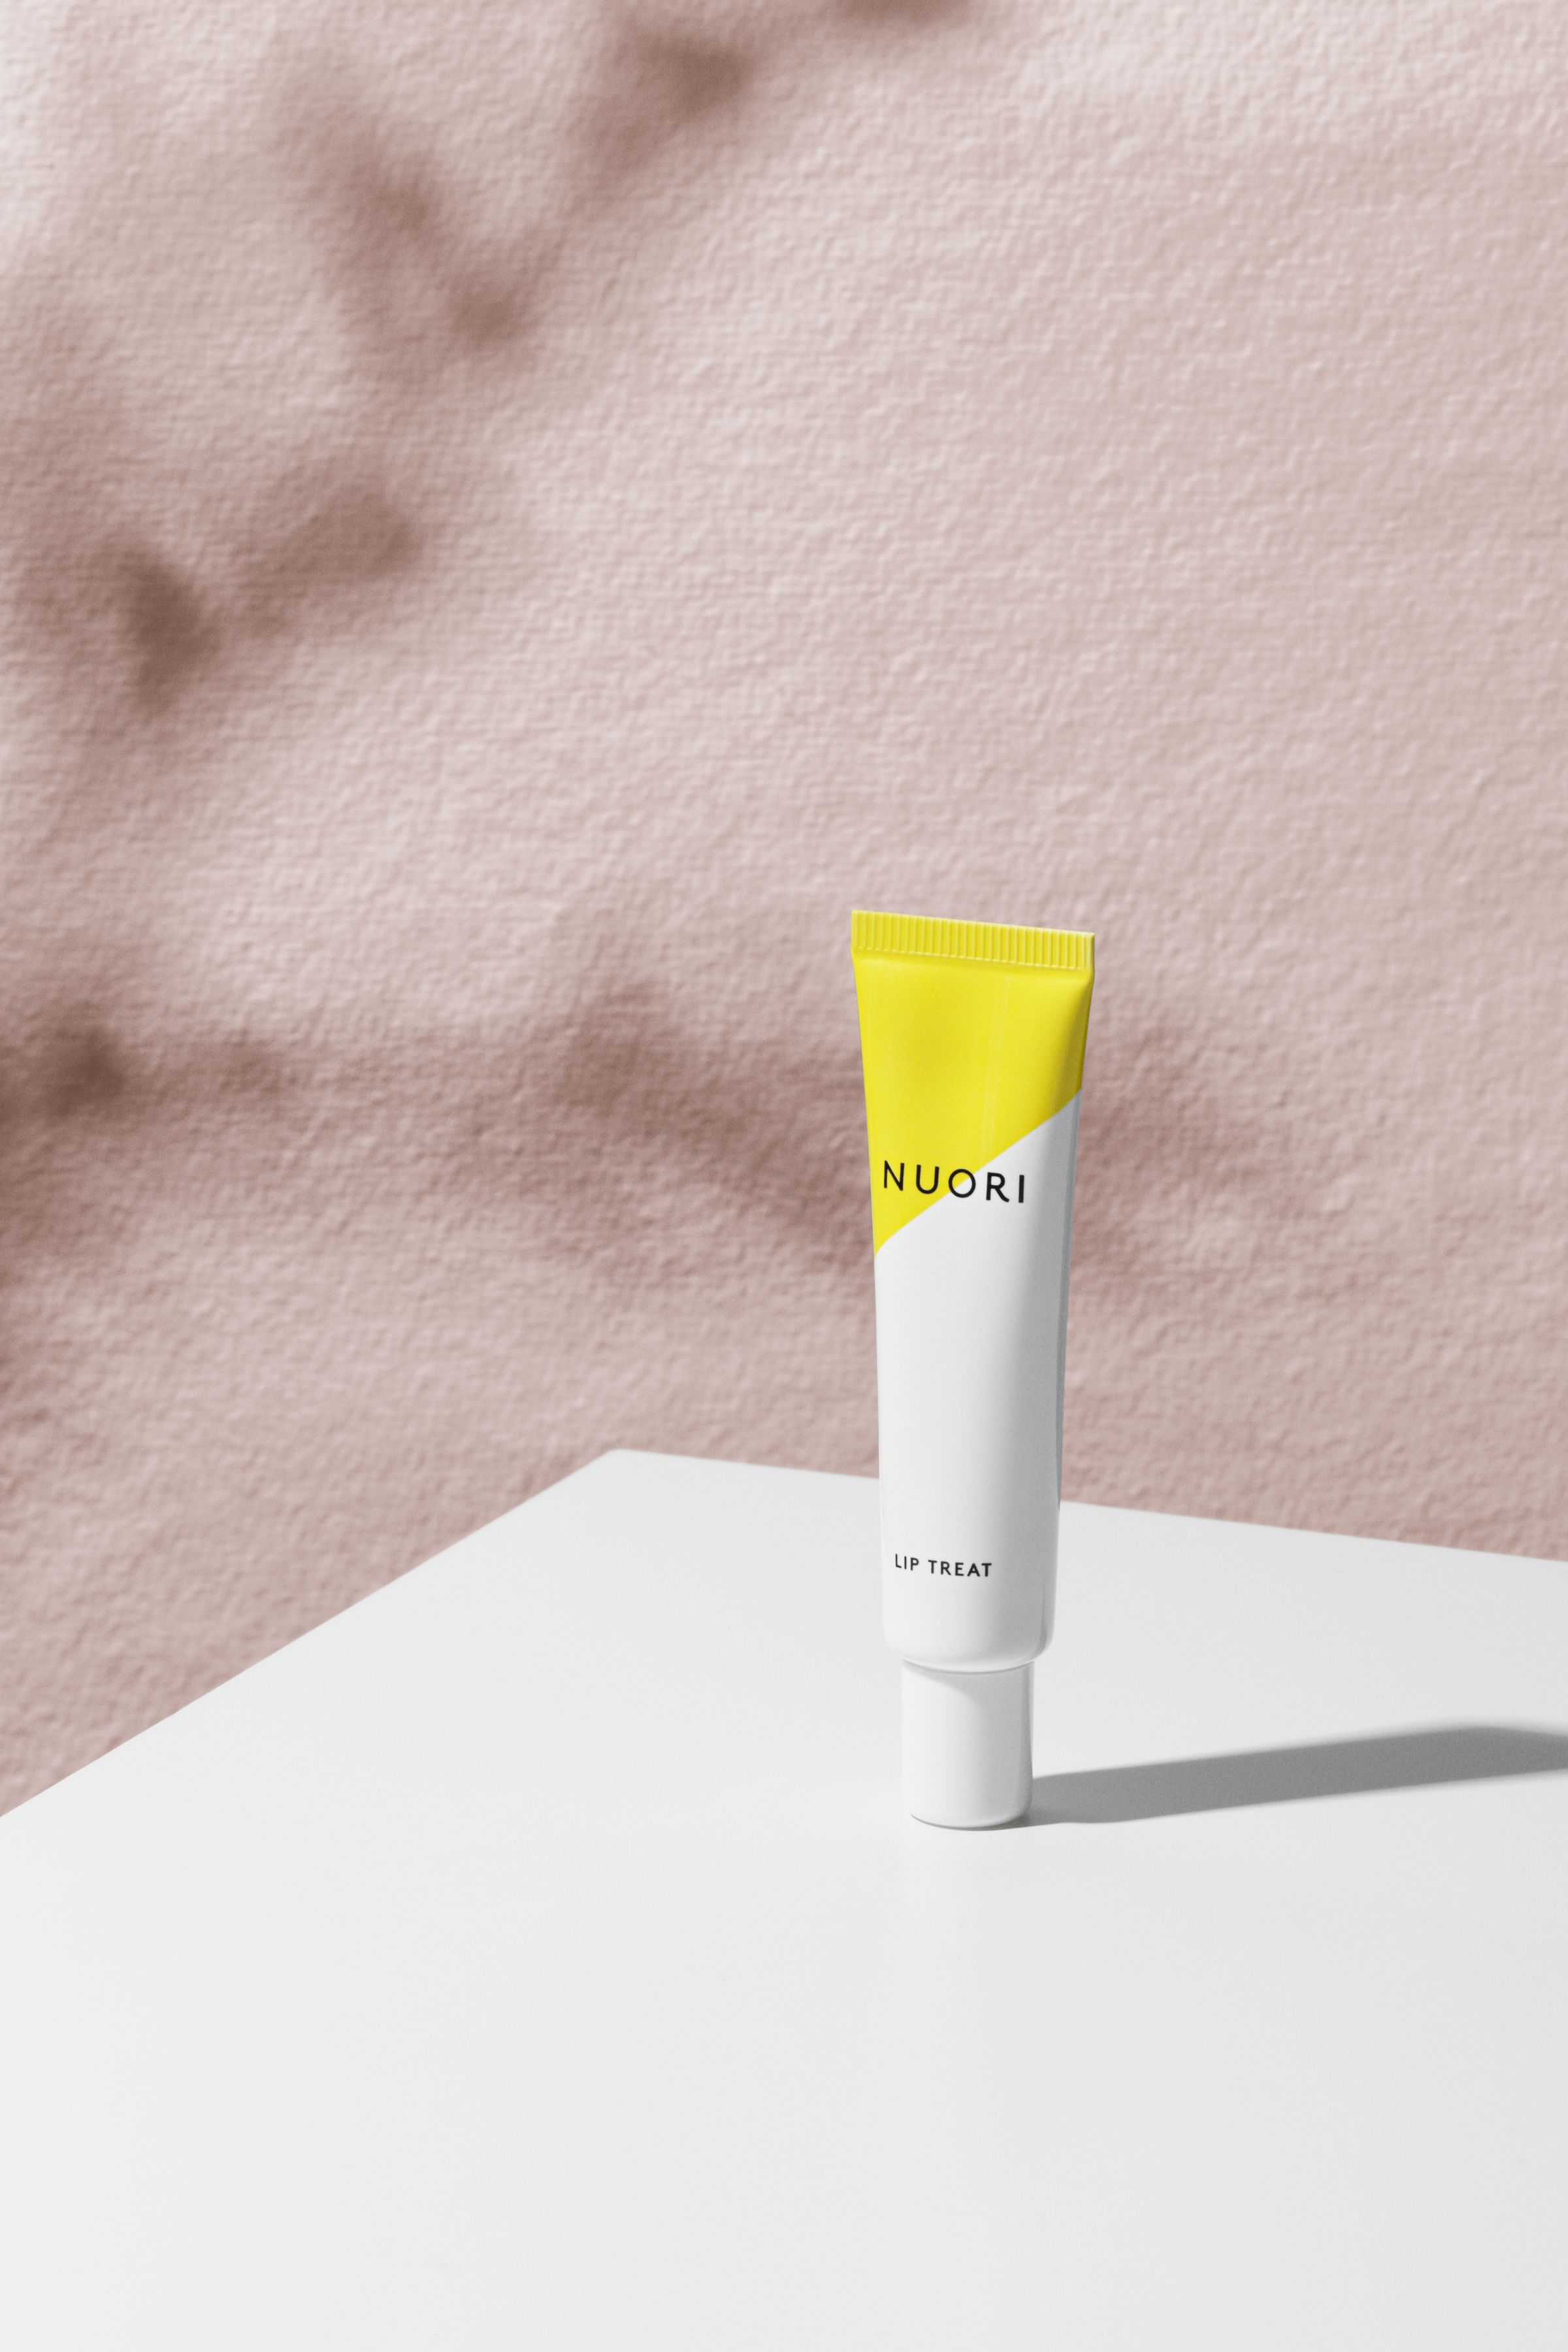 Nuori Lip Treat packaging design and art direction